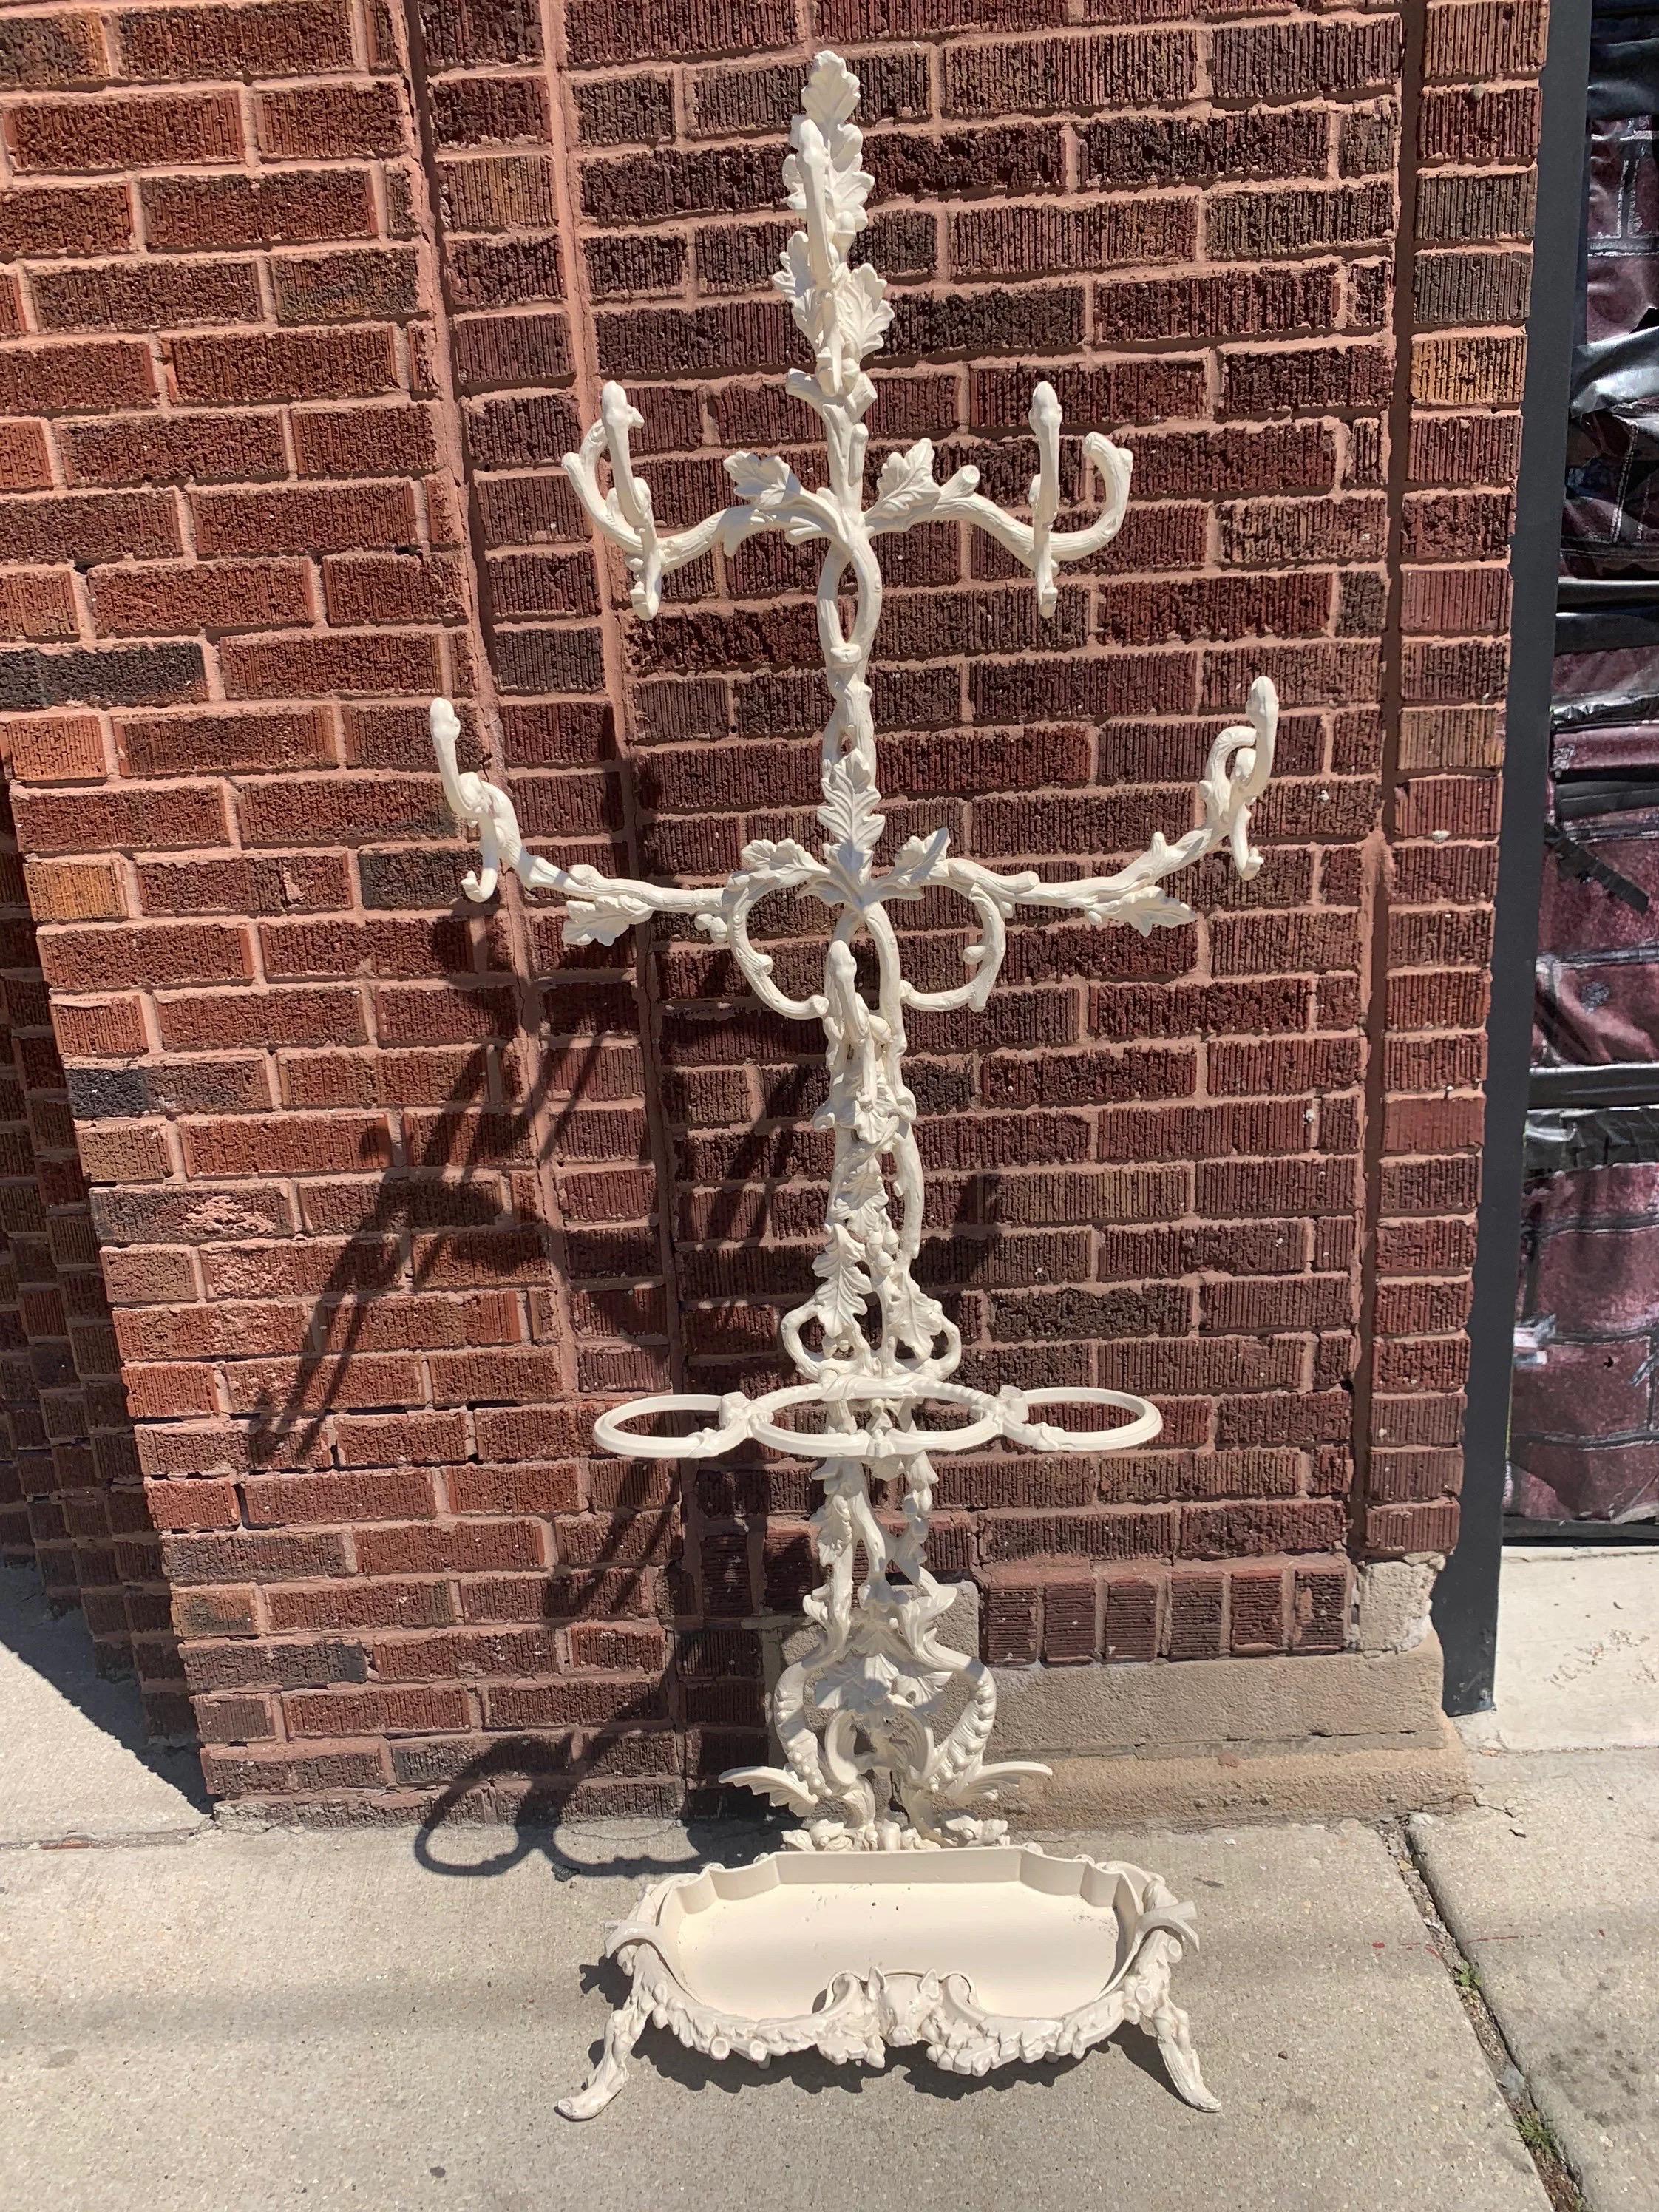 Antique Victorian Style Ornate White Painted Coat Rack

There are 3 umbrella compartments, and 6 hooks. Each hook is a fashioned from a bird, and the tree is made of oak leaves and acorns. 

Circa 1930

Dimensions:

H 67”
W 27”
D 10”